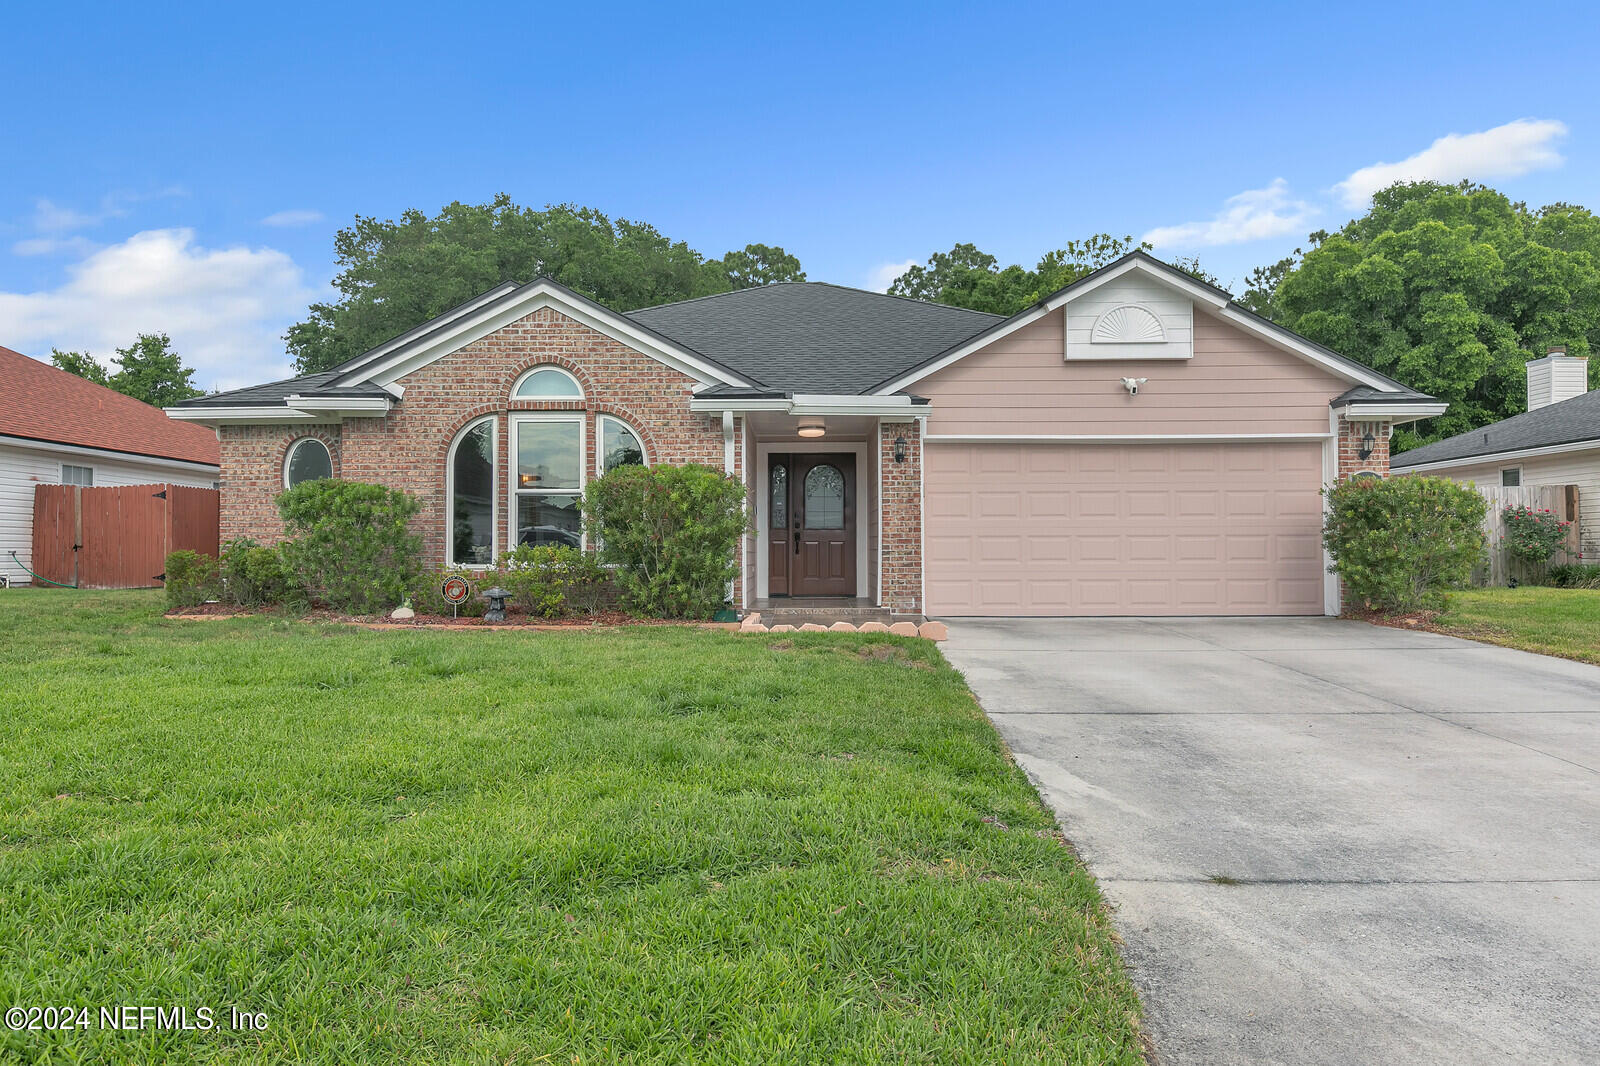 Jacksonville, FL home for sale located at 1283 Summit Oaks Drive, Jacksonville, FL 32221